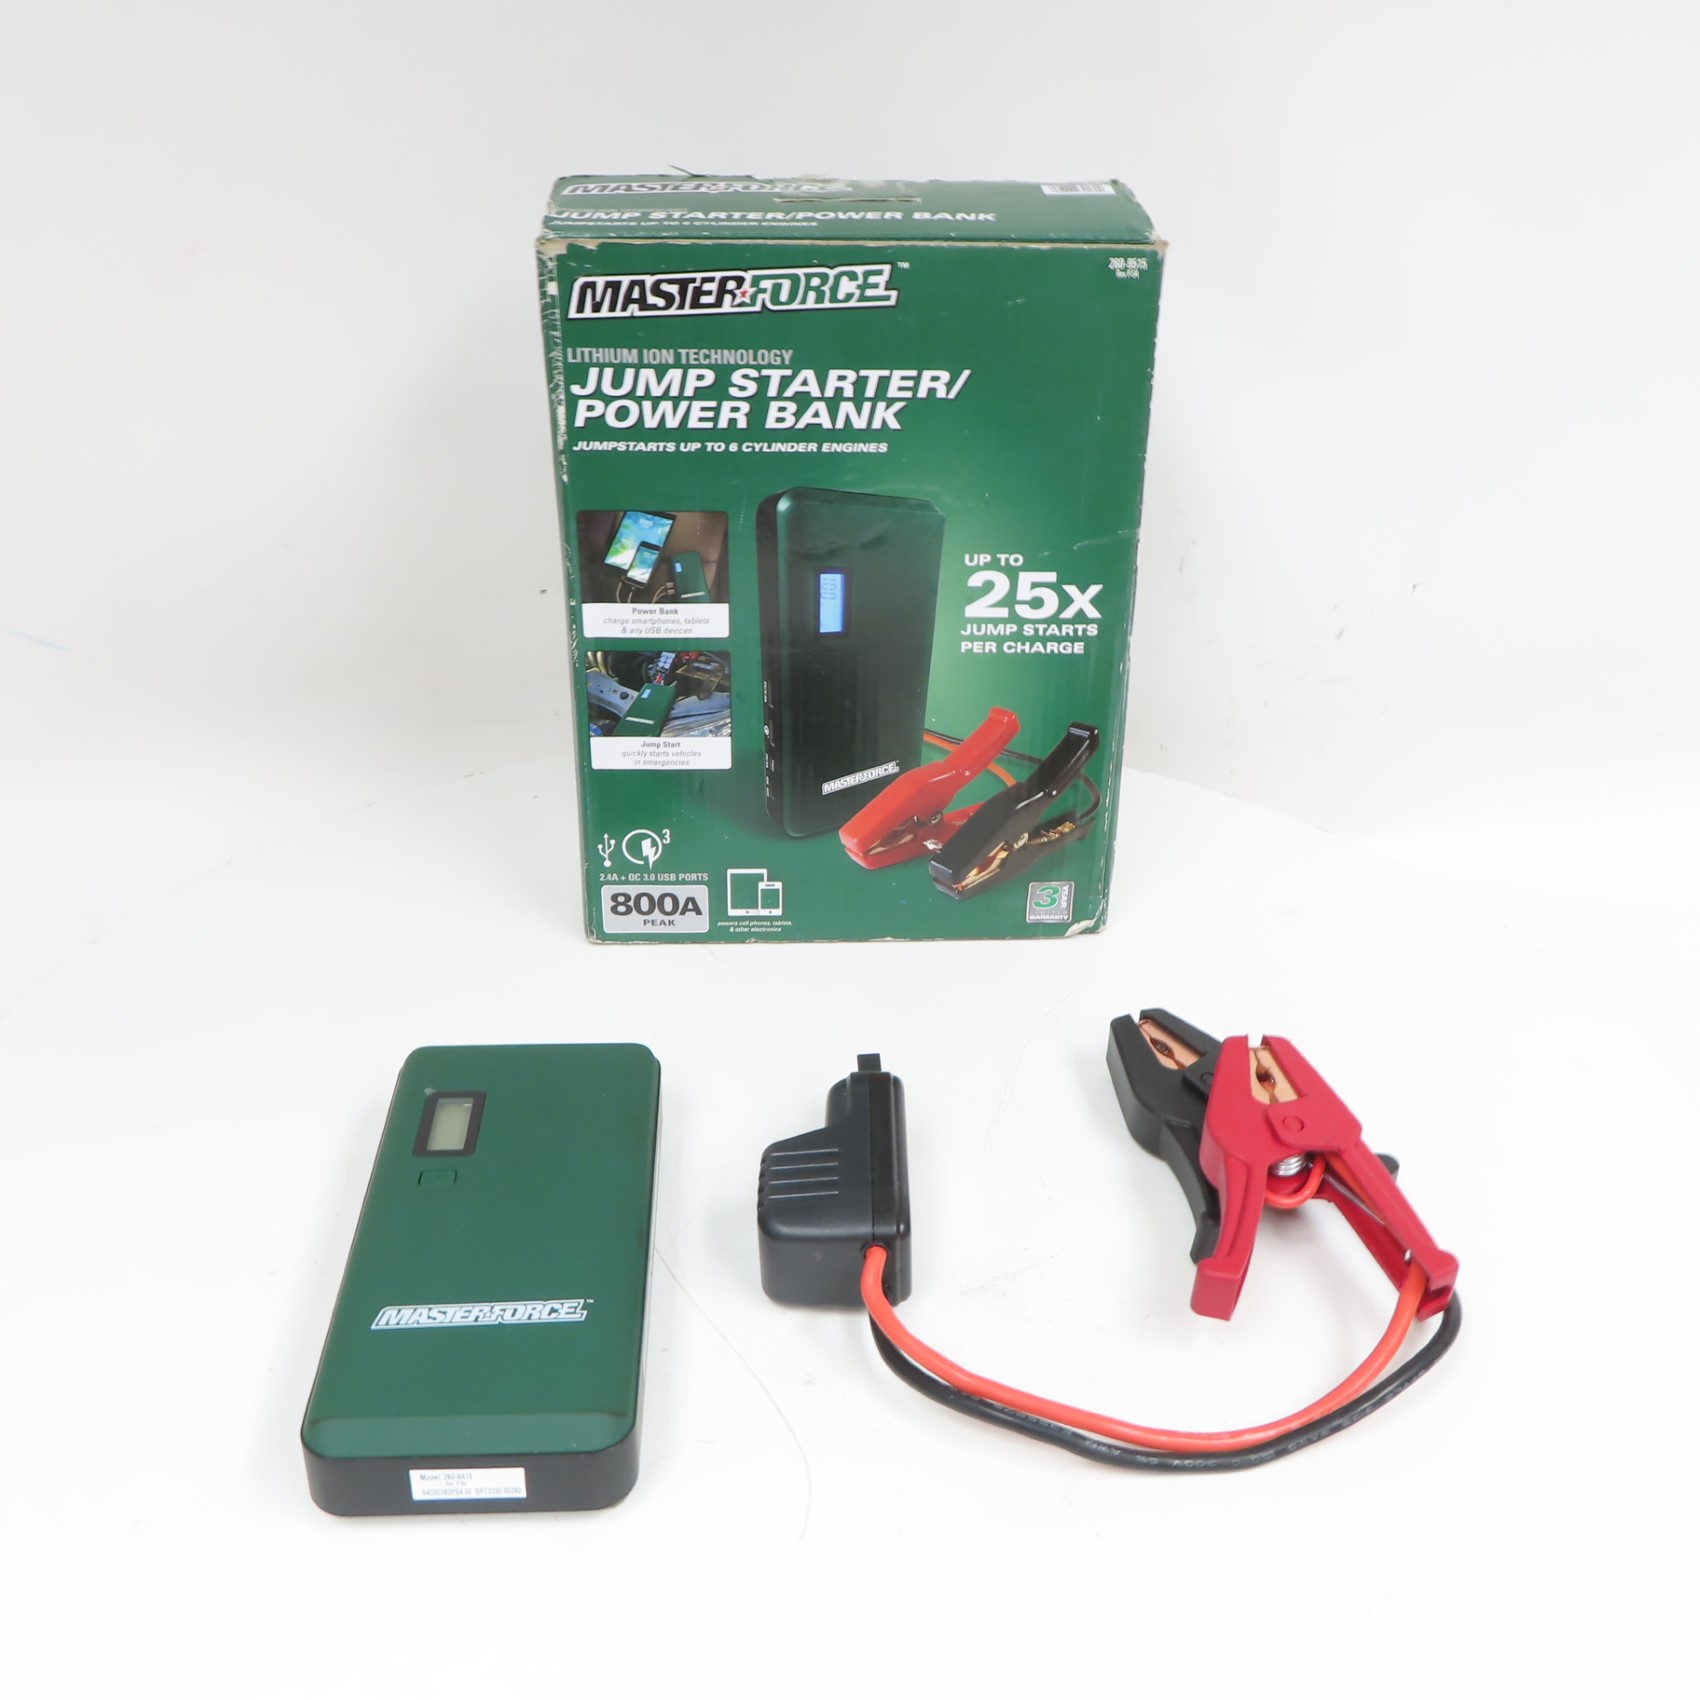 VOLT FORCE 1000A AUTO STARTER MOBILE POWER BANK Like New